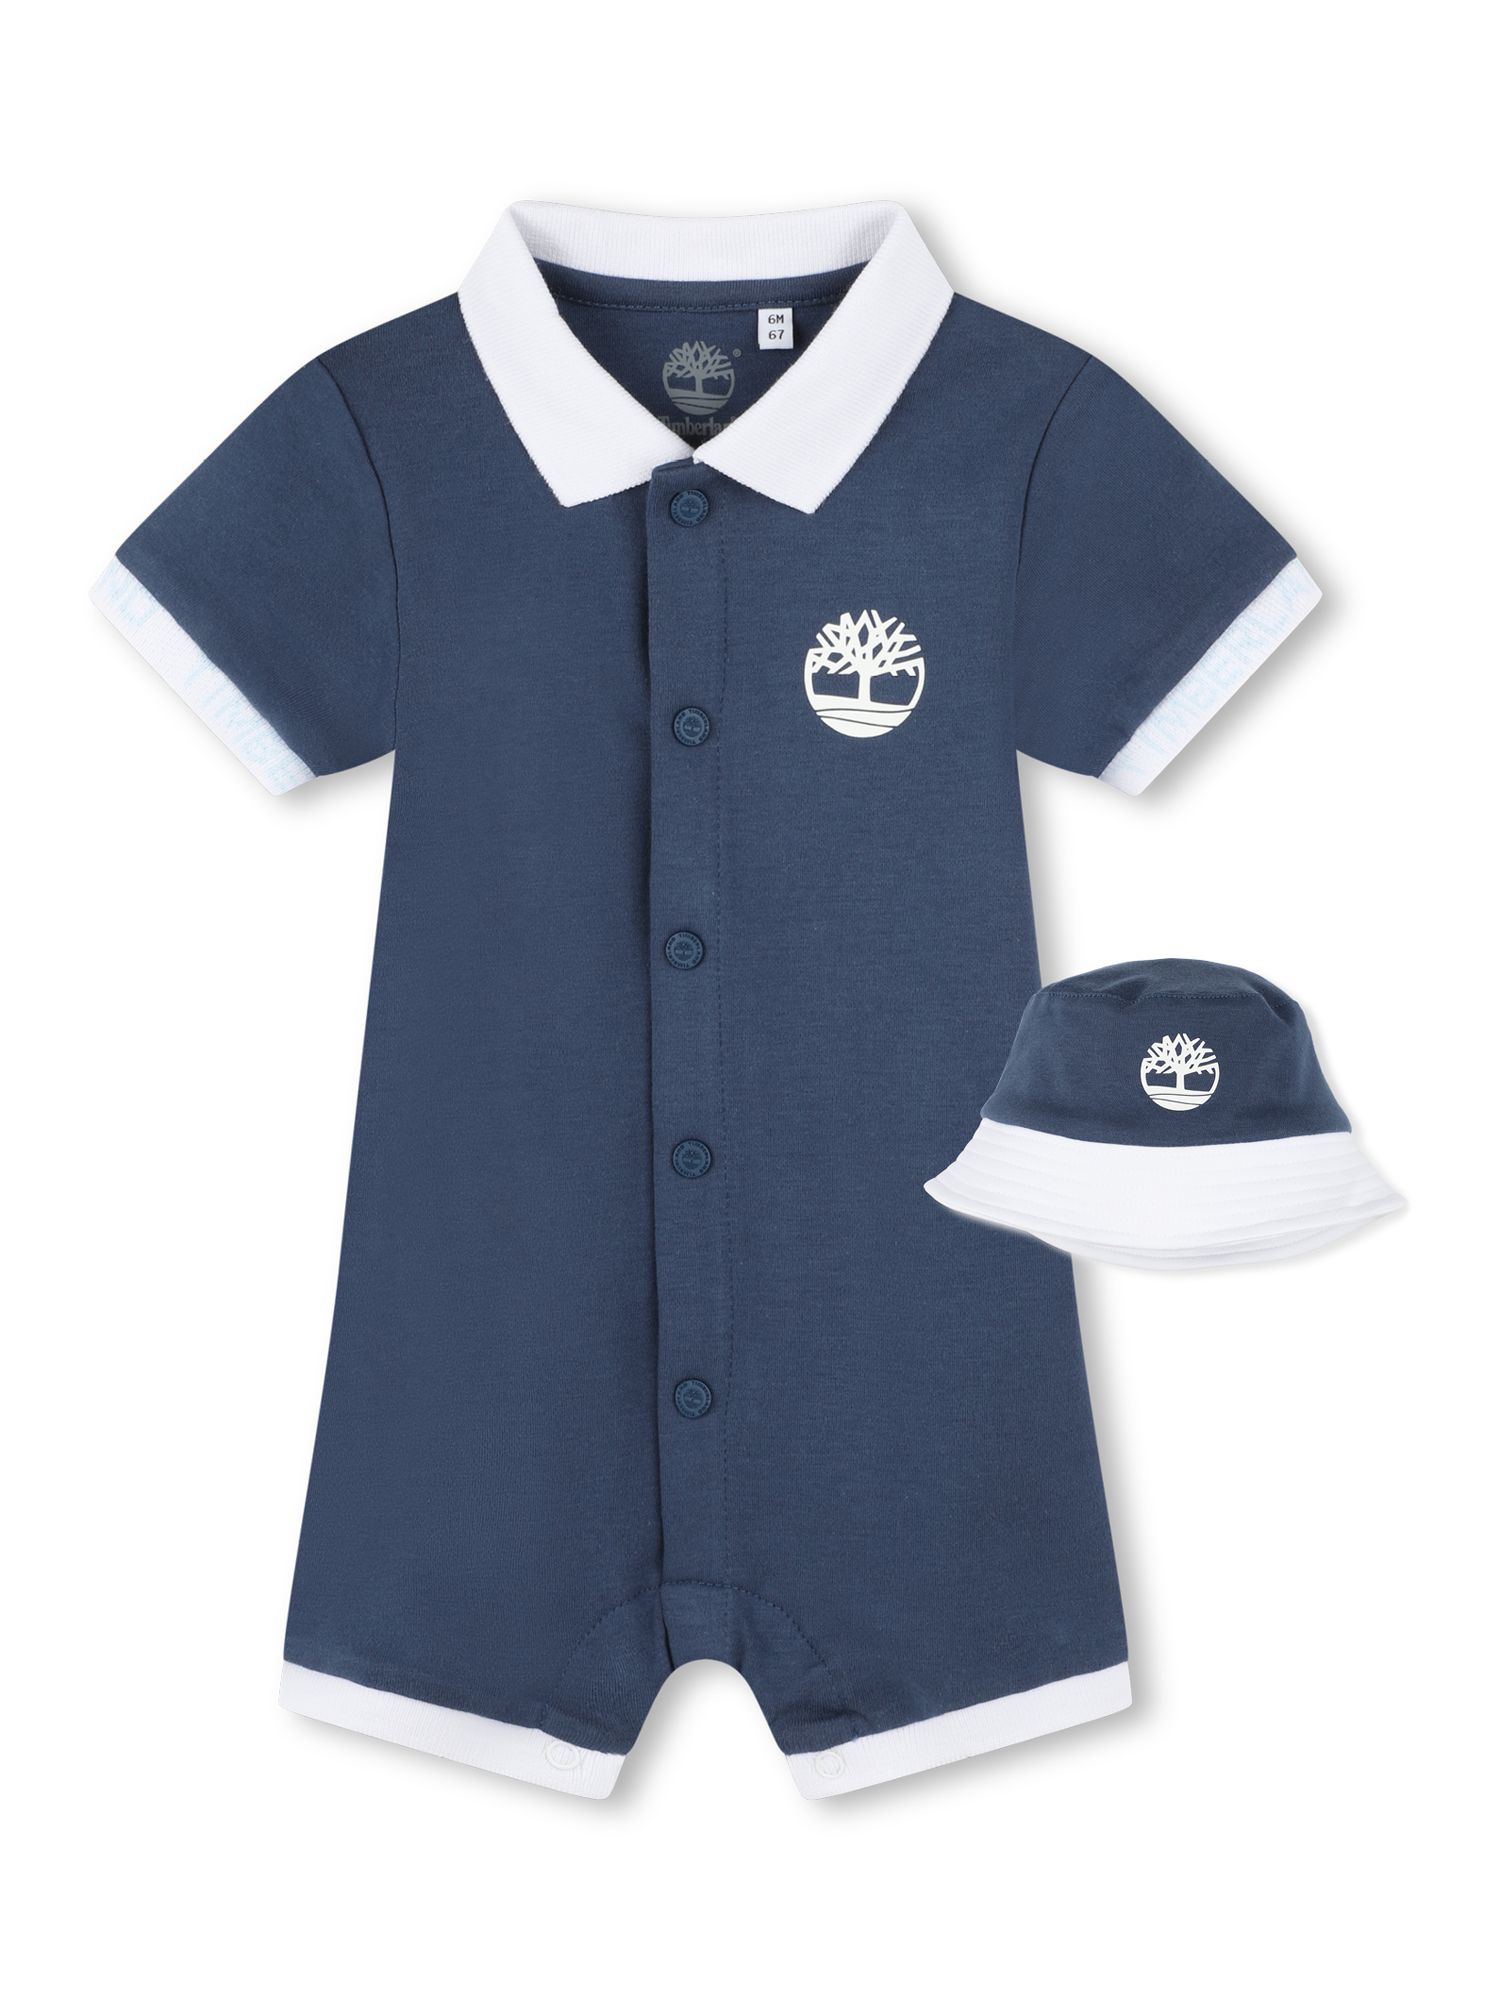 Timberland Baby Overalls & Reversible Hat Set, Navy/White, 3 months